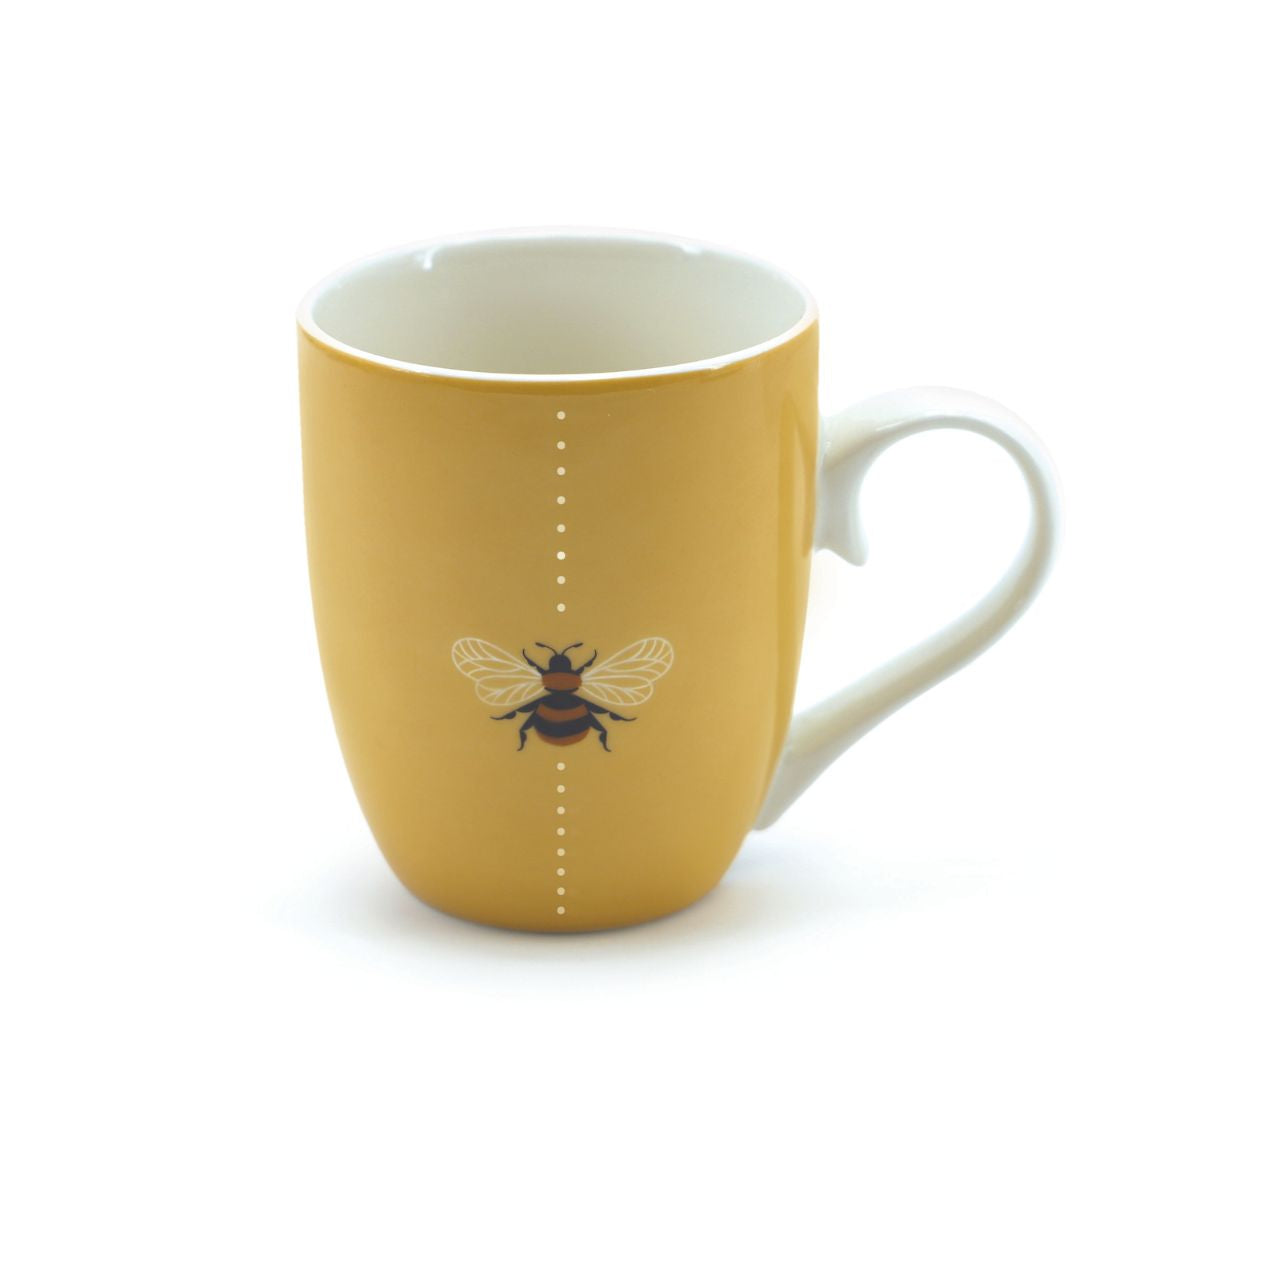 The Tipperary Single Mug in yellow is a must-have for any coffee or tea lover. Crafted with high-quality materials, this mug is built to last. Its sleek design and beautiful yellow colour will brighten up your mornings. Add it to your collection and start your day with a touch of elegance.